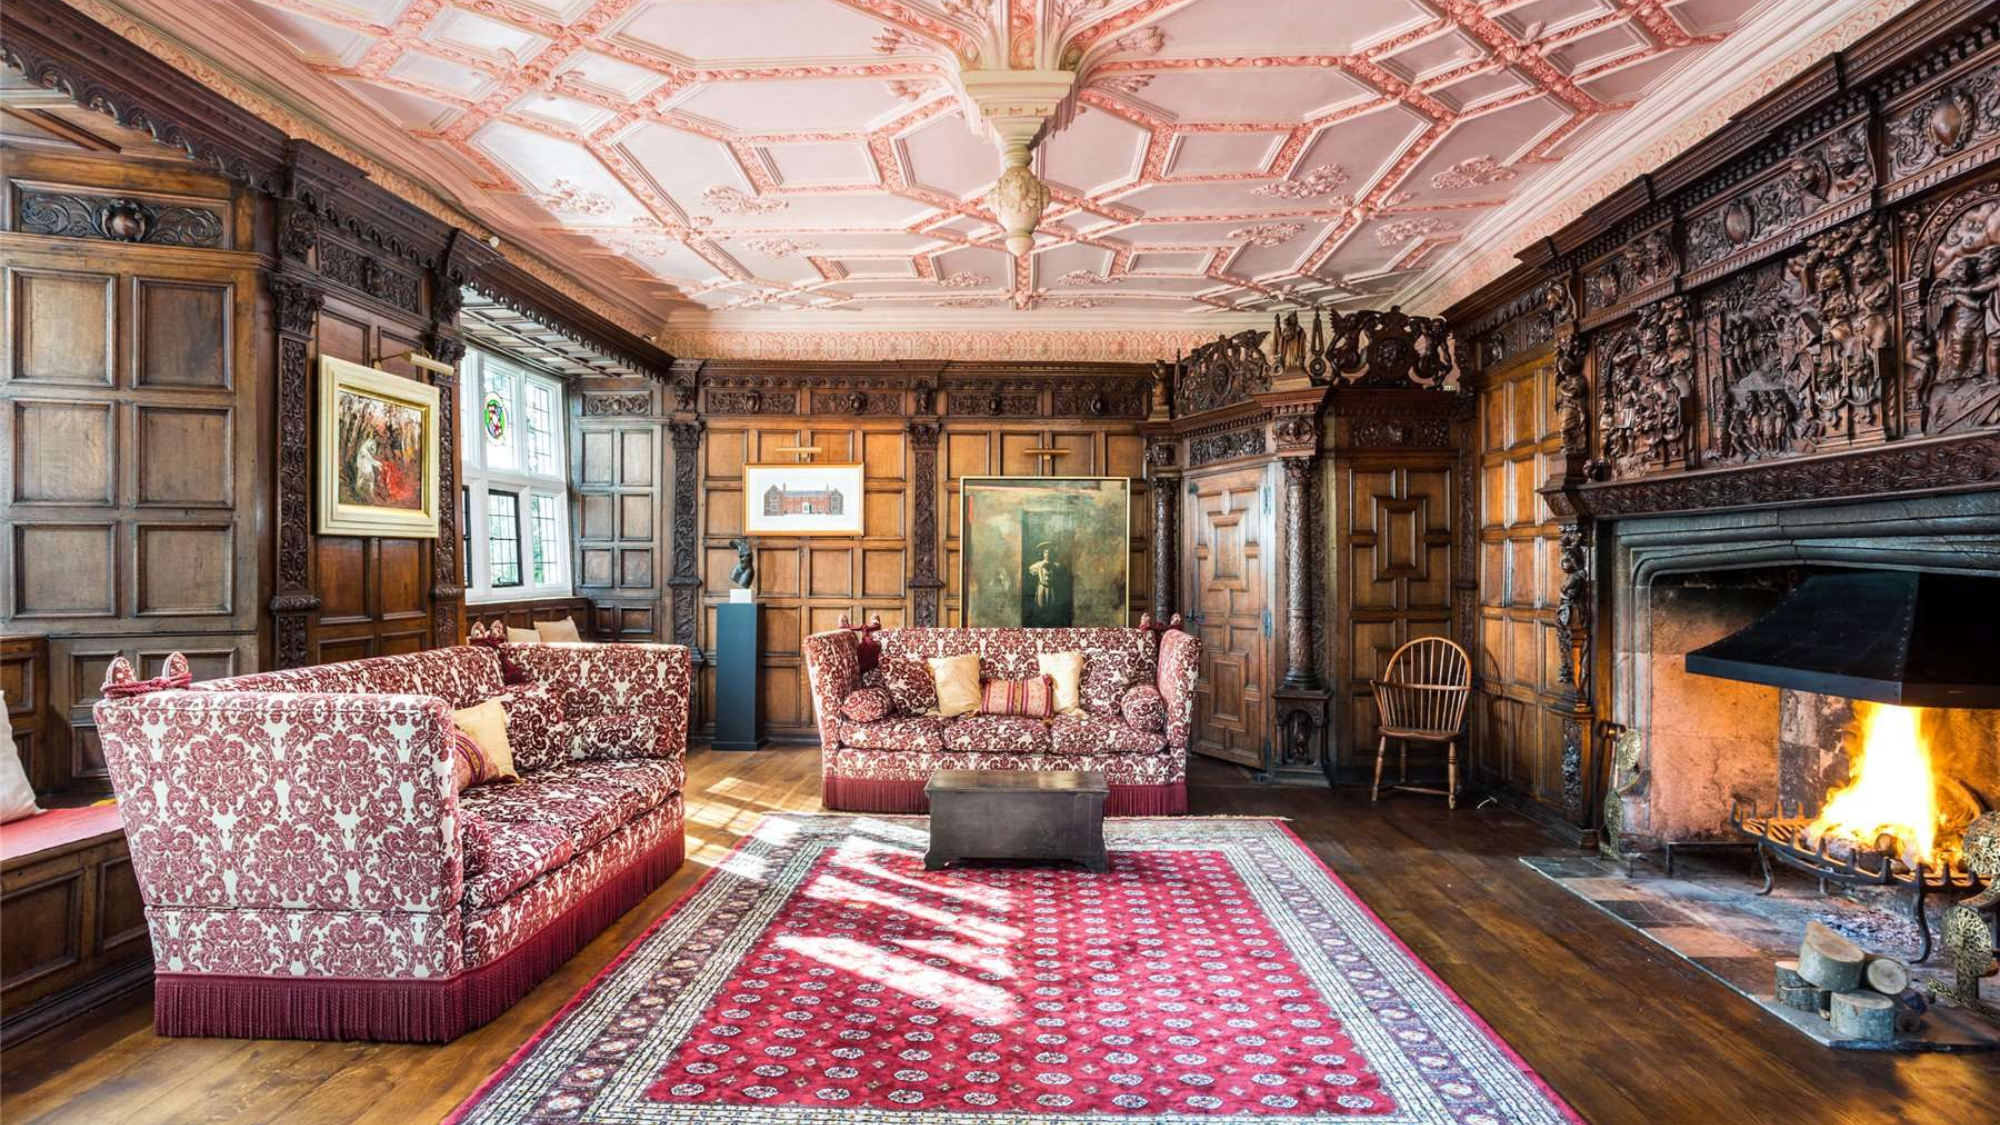 Interiors of a Grade I manor house, with decorative ceiling, wood panelling and fireplace